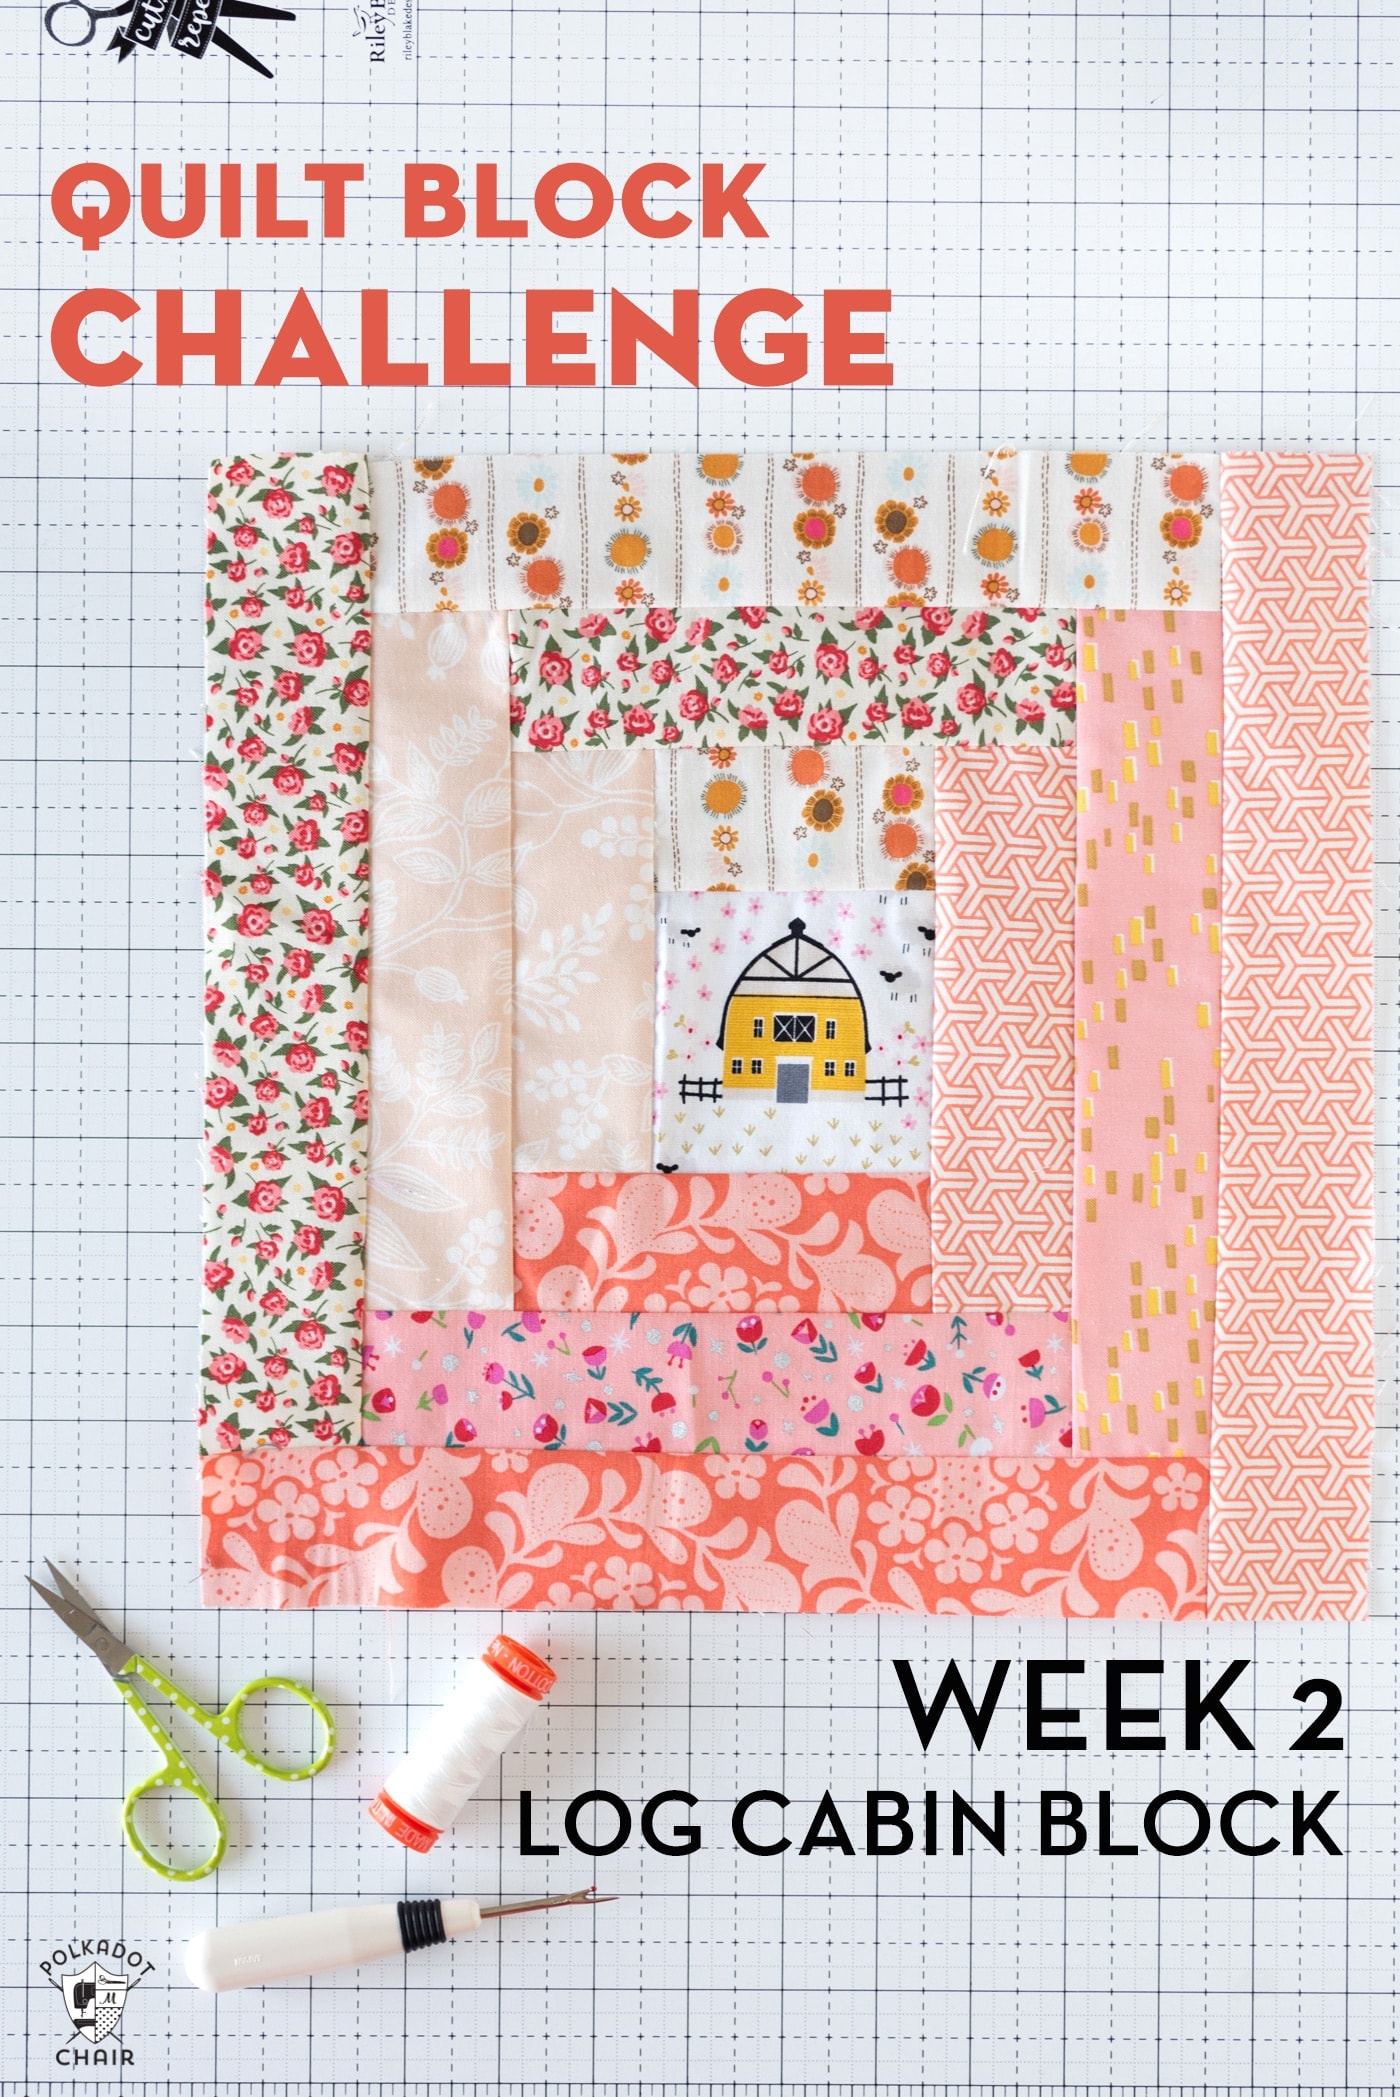 How to Make a Log Cabin Quilt Block for the Quilt Block Challenge